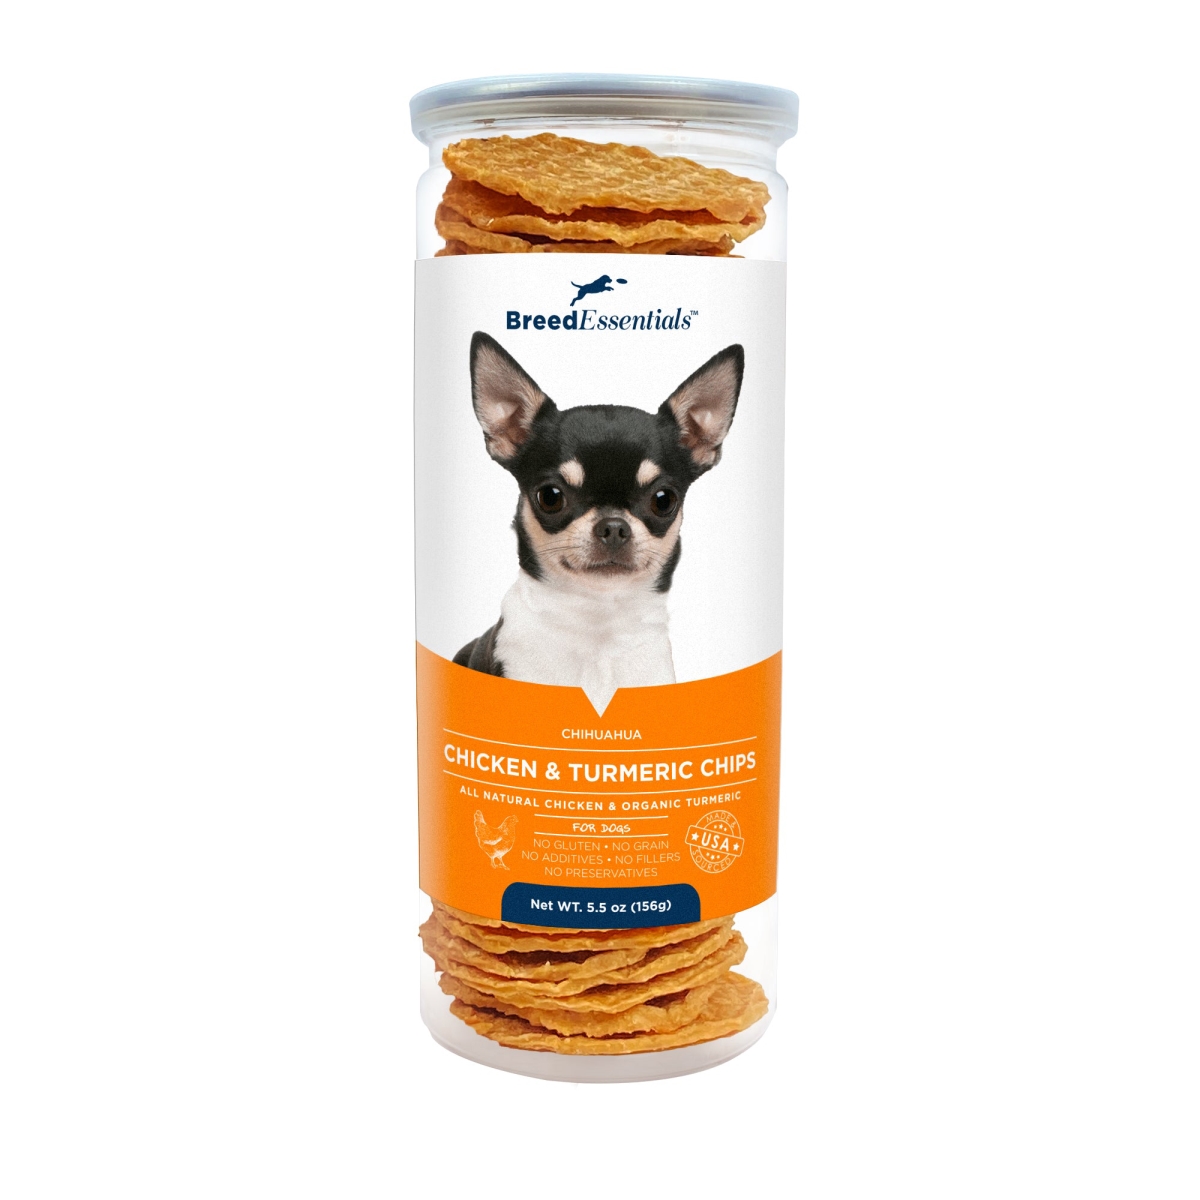 Picture of Breed Essentials 197247000594 5.5 oz Chicken & Turmeric Chips - Chihuahua